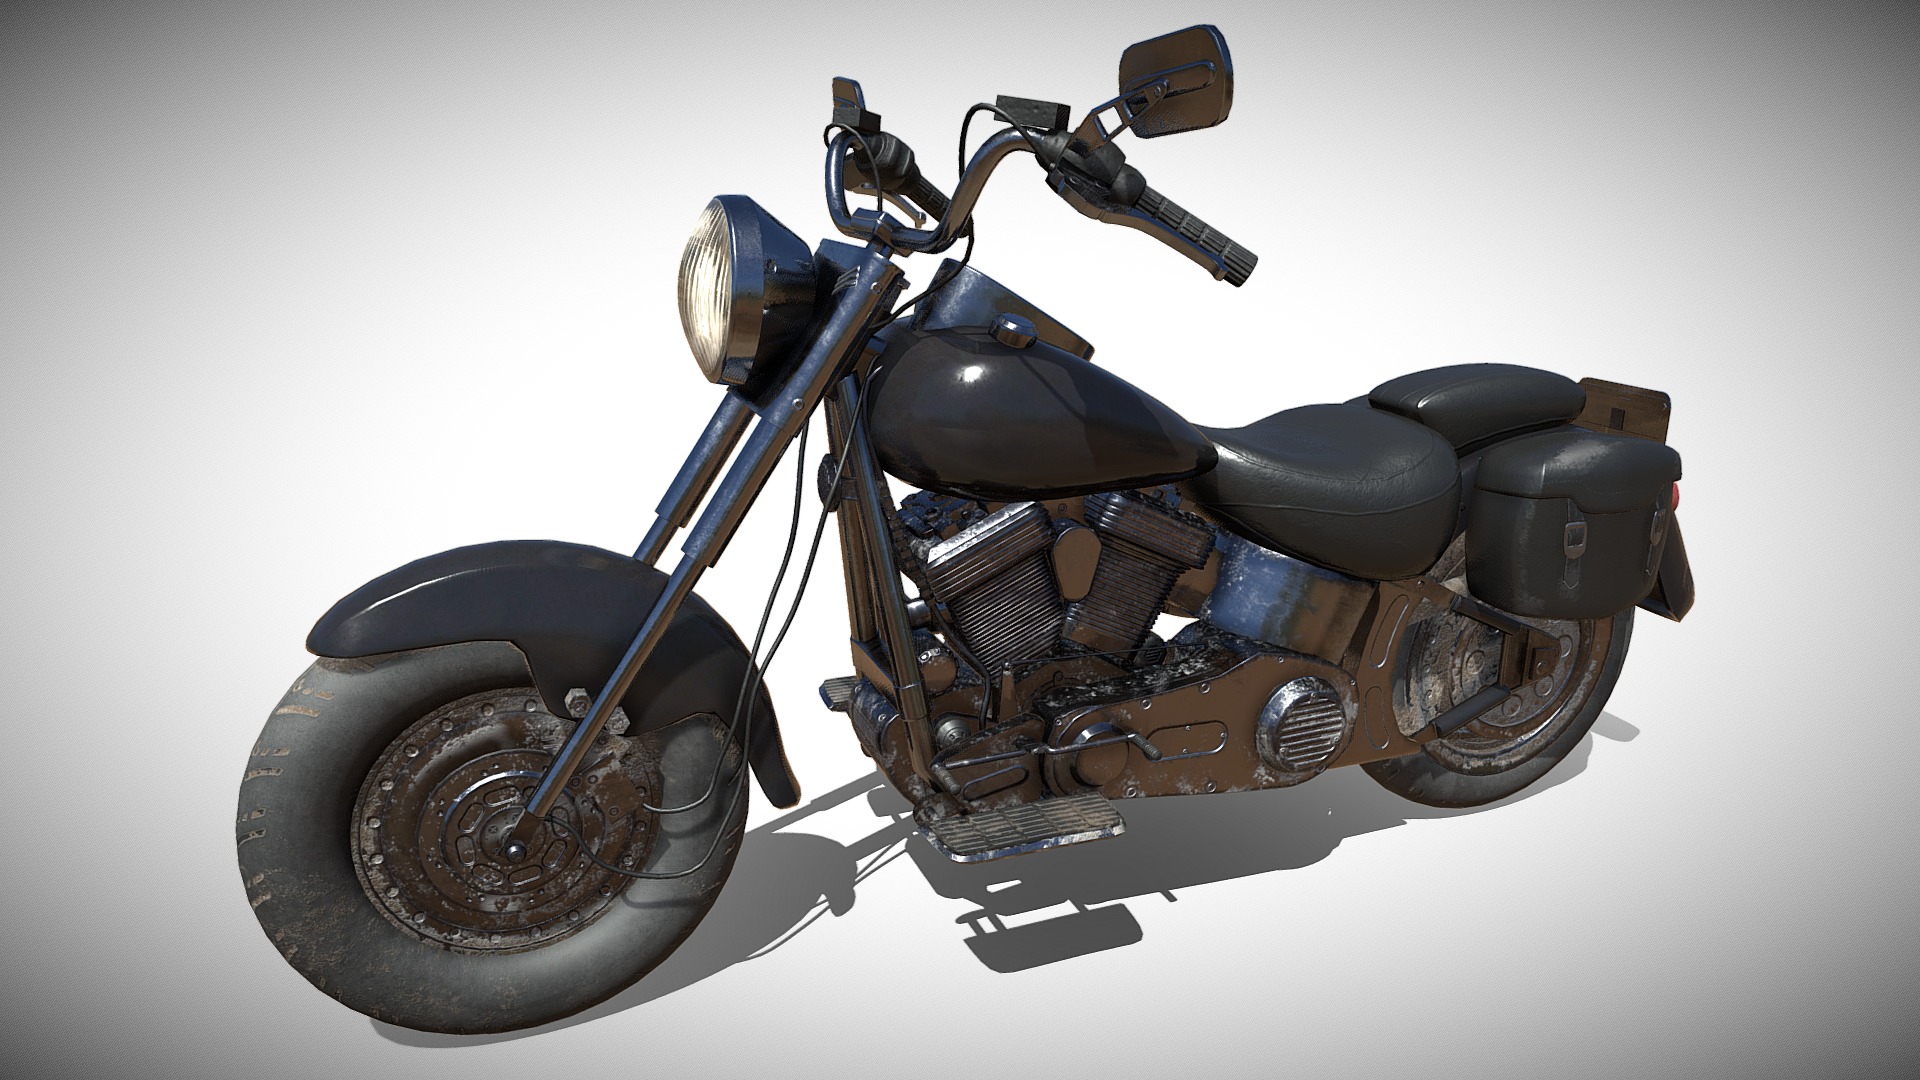 3D model Harley Davidson 1990 FatBoy - This is a 3D model of the Harley Davidson 1990 FatBoy. The 3D model is about a black motorcycle with a white background.